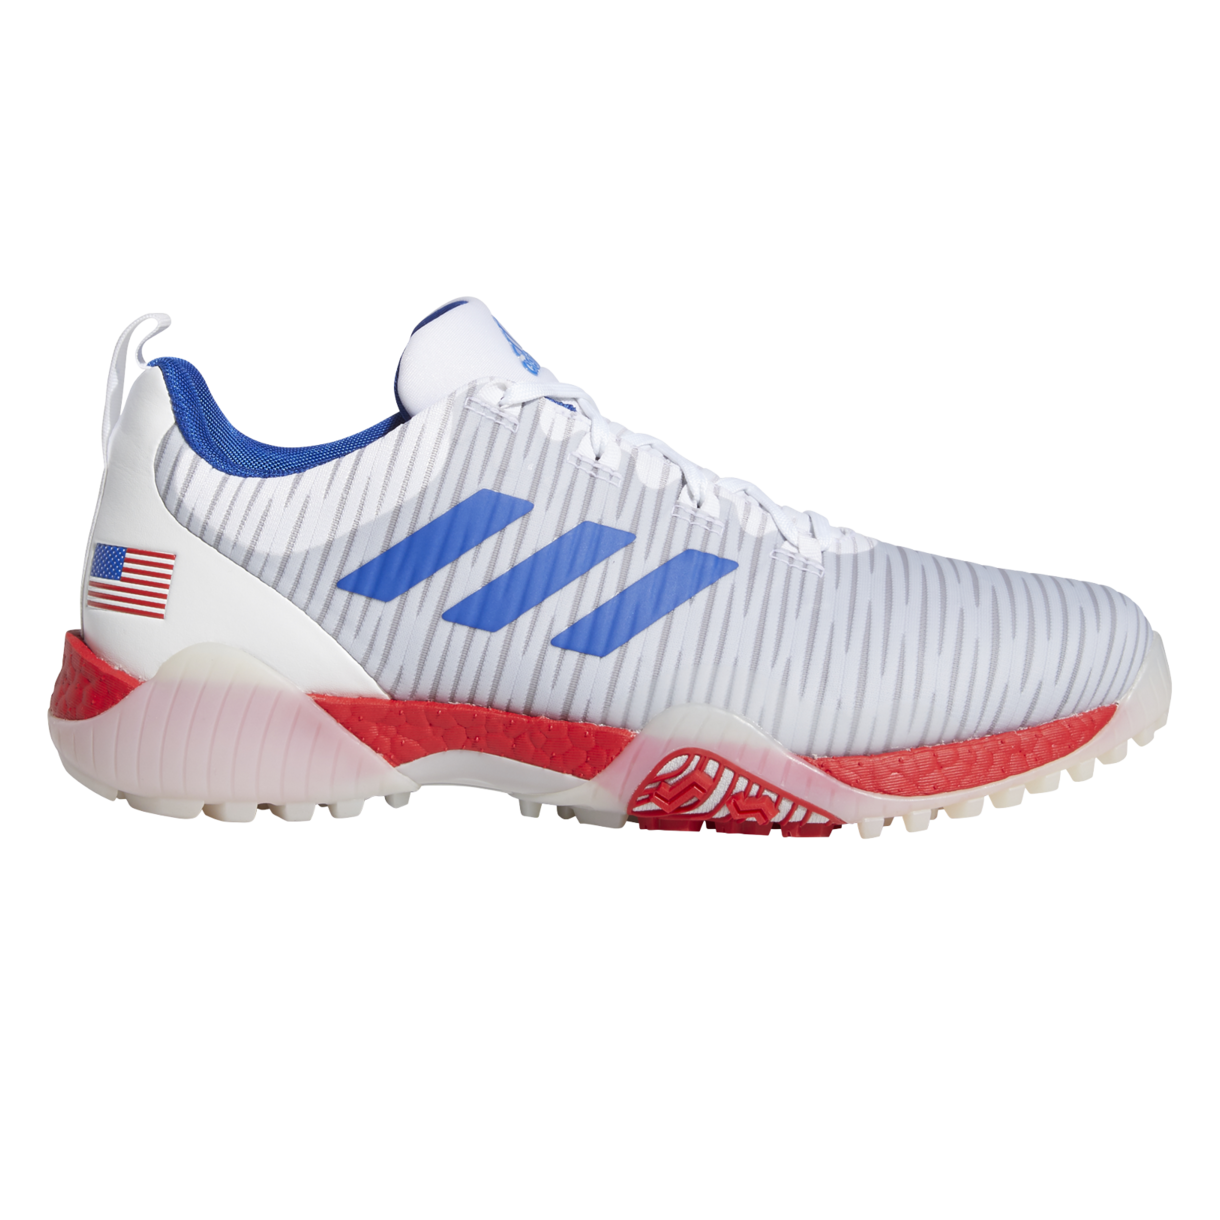 adidas shoes red white and blue stripes